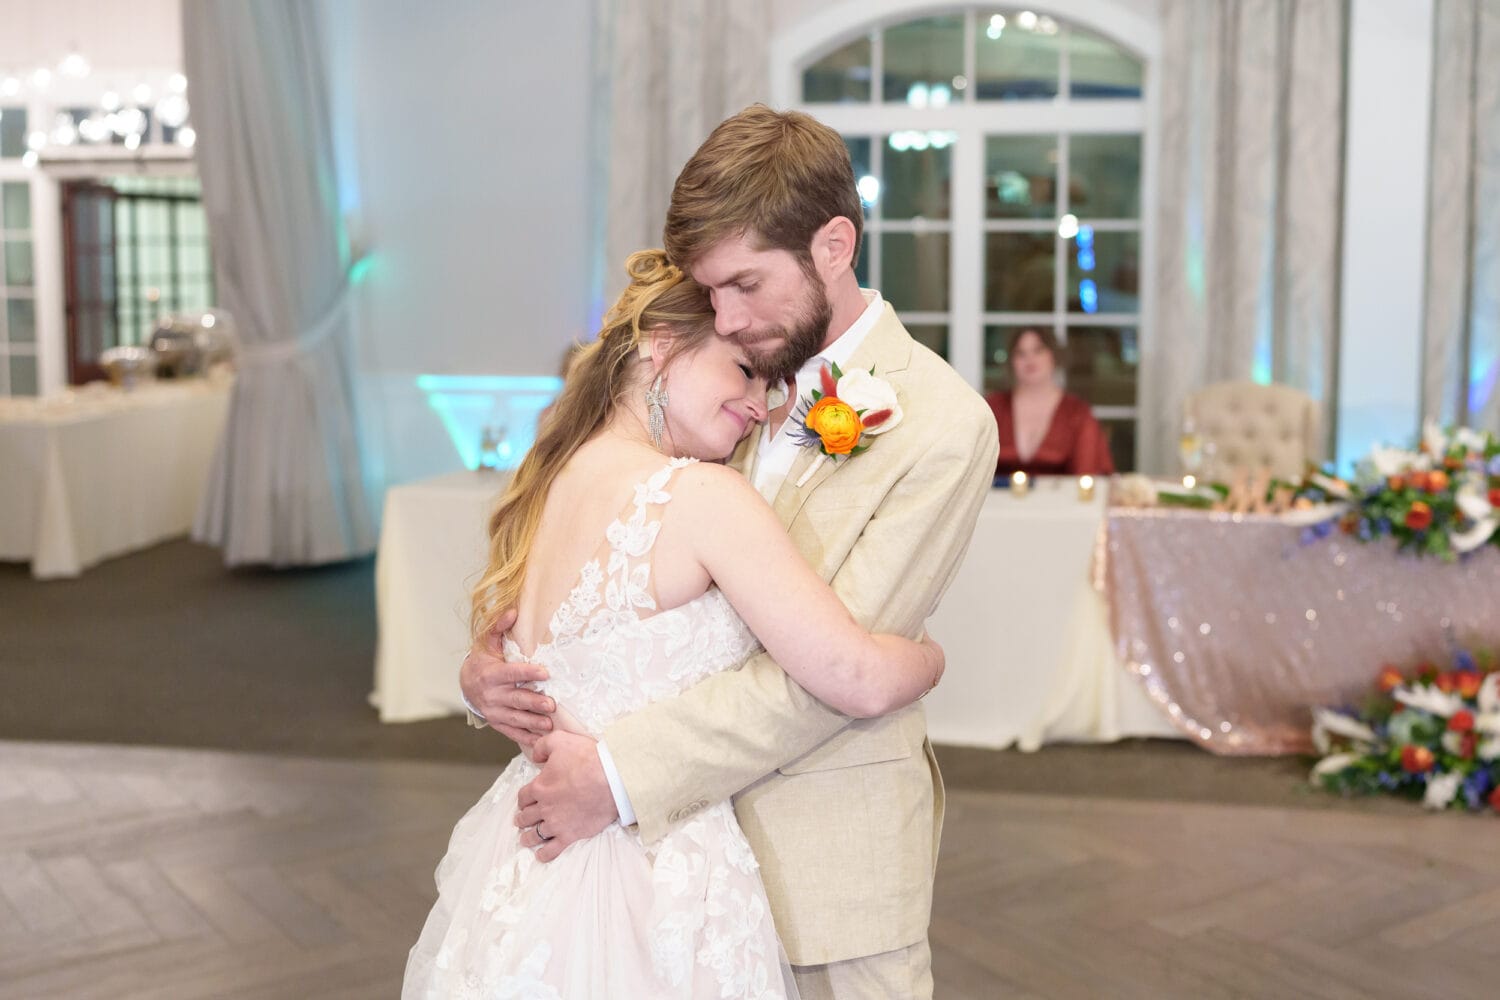 First dance in the ballroom - 21 Main Events - North Myrtle Beach